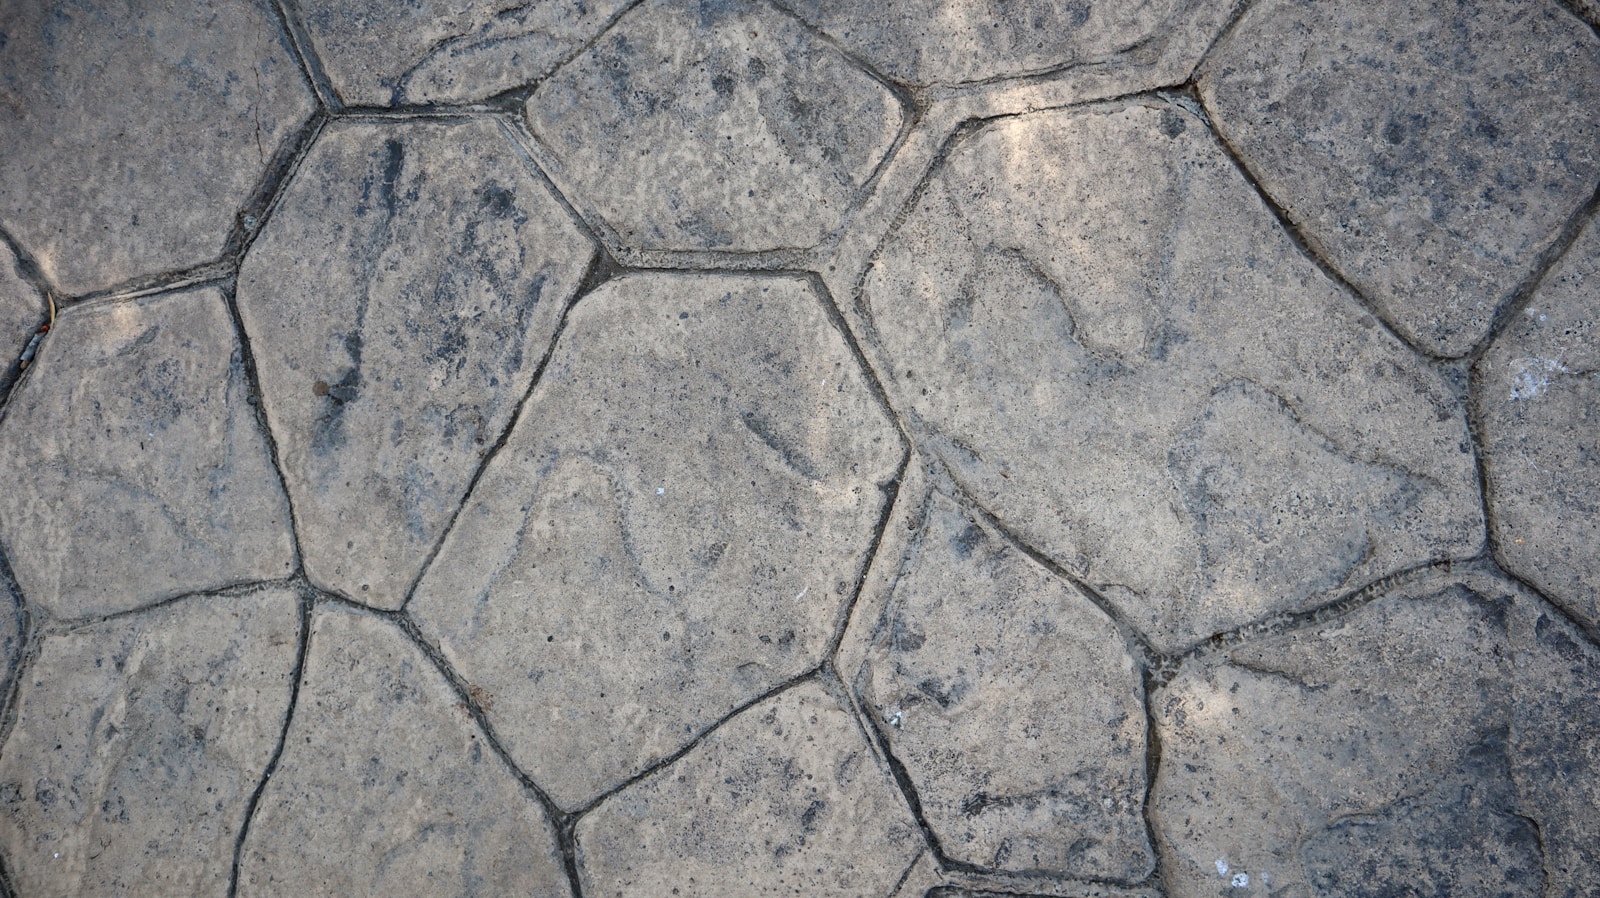 a close up view of a stone pavement